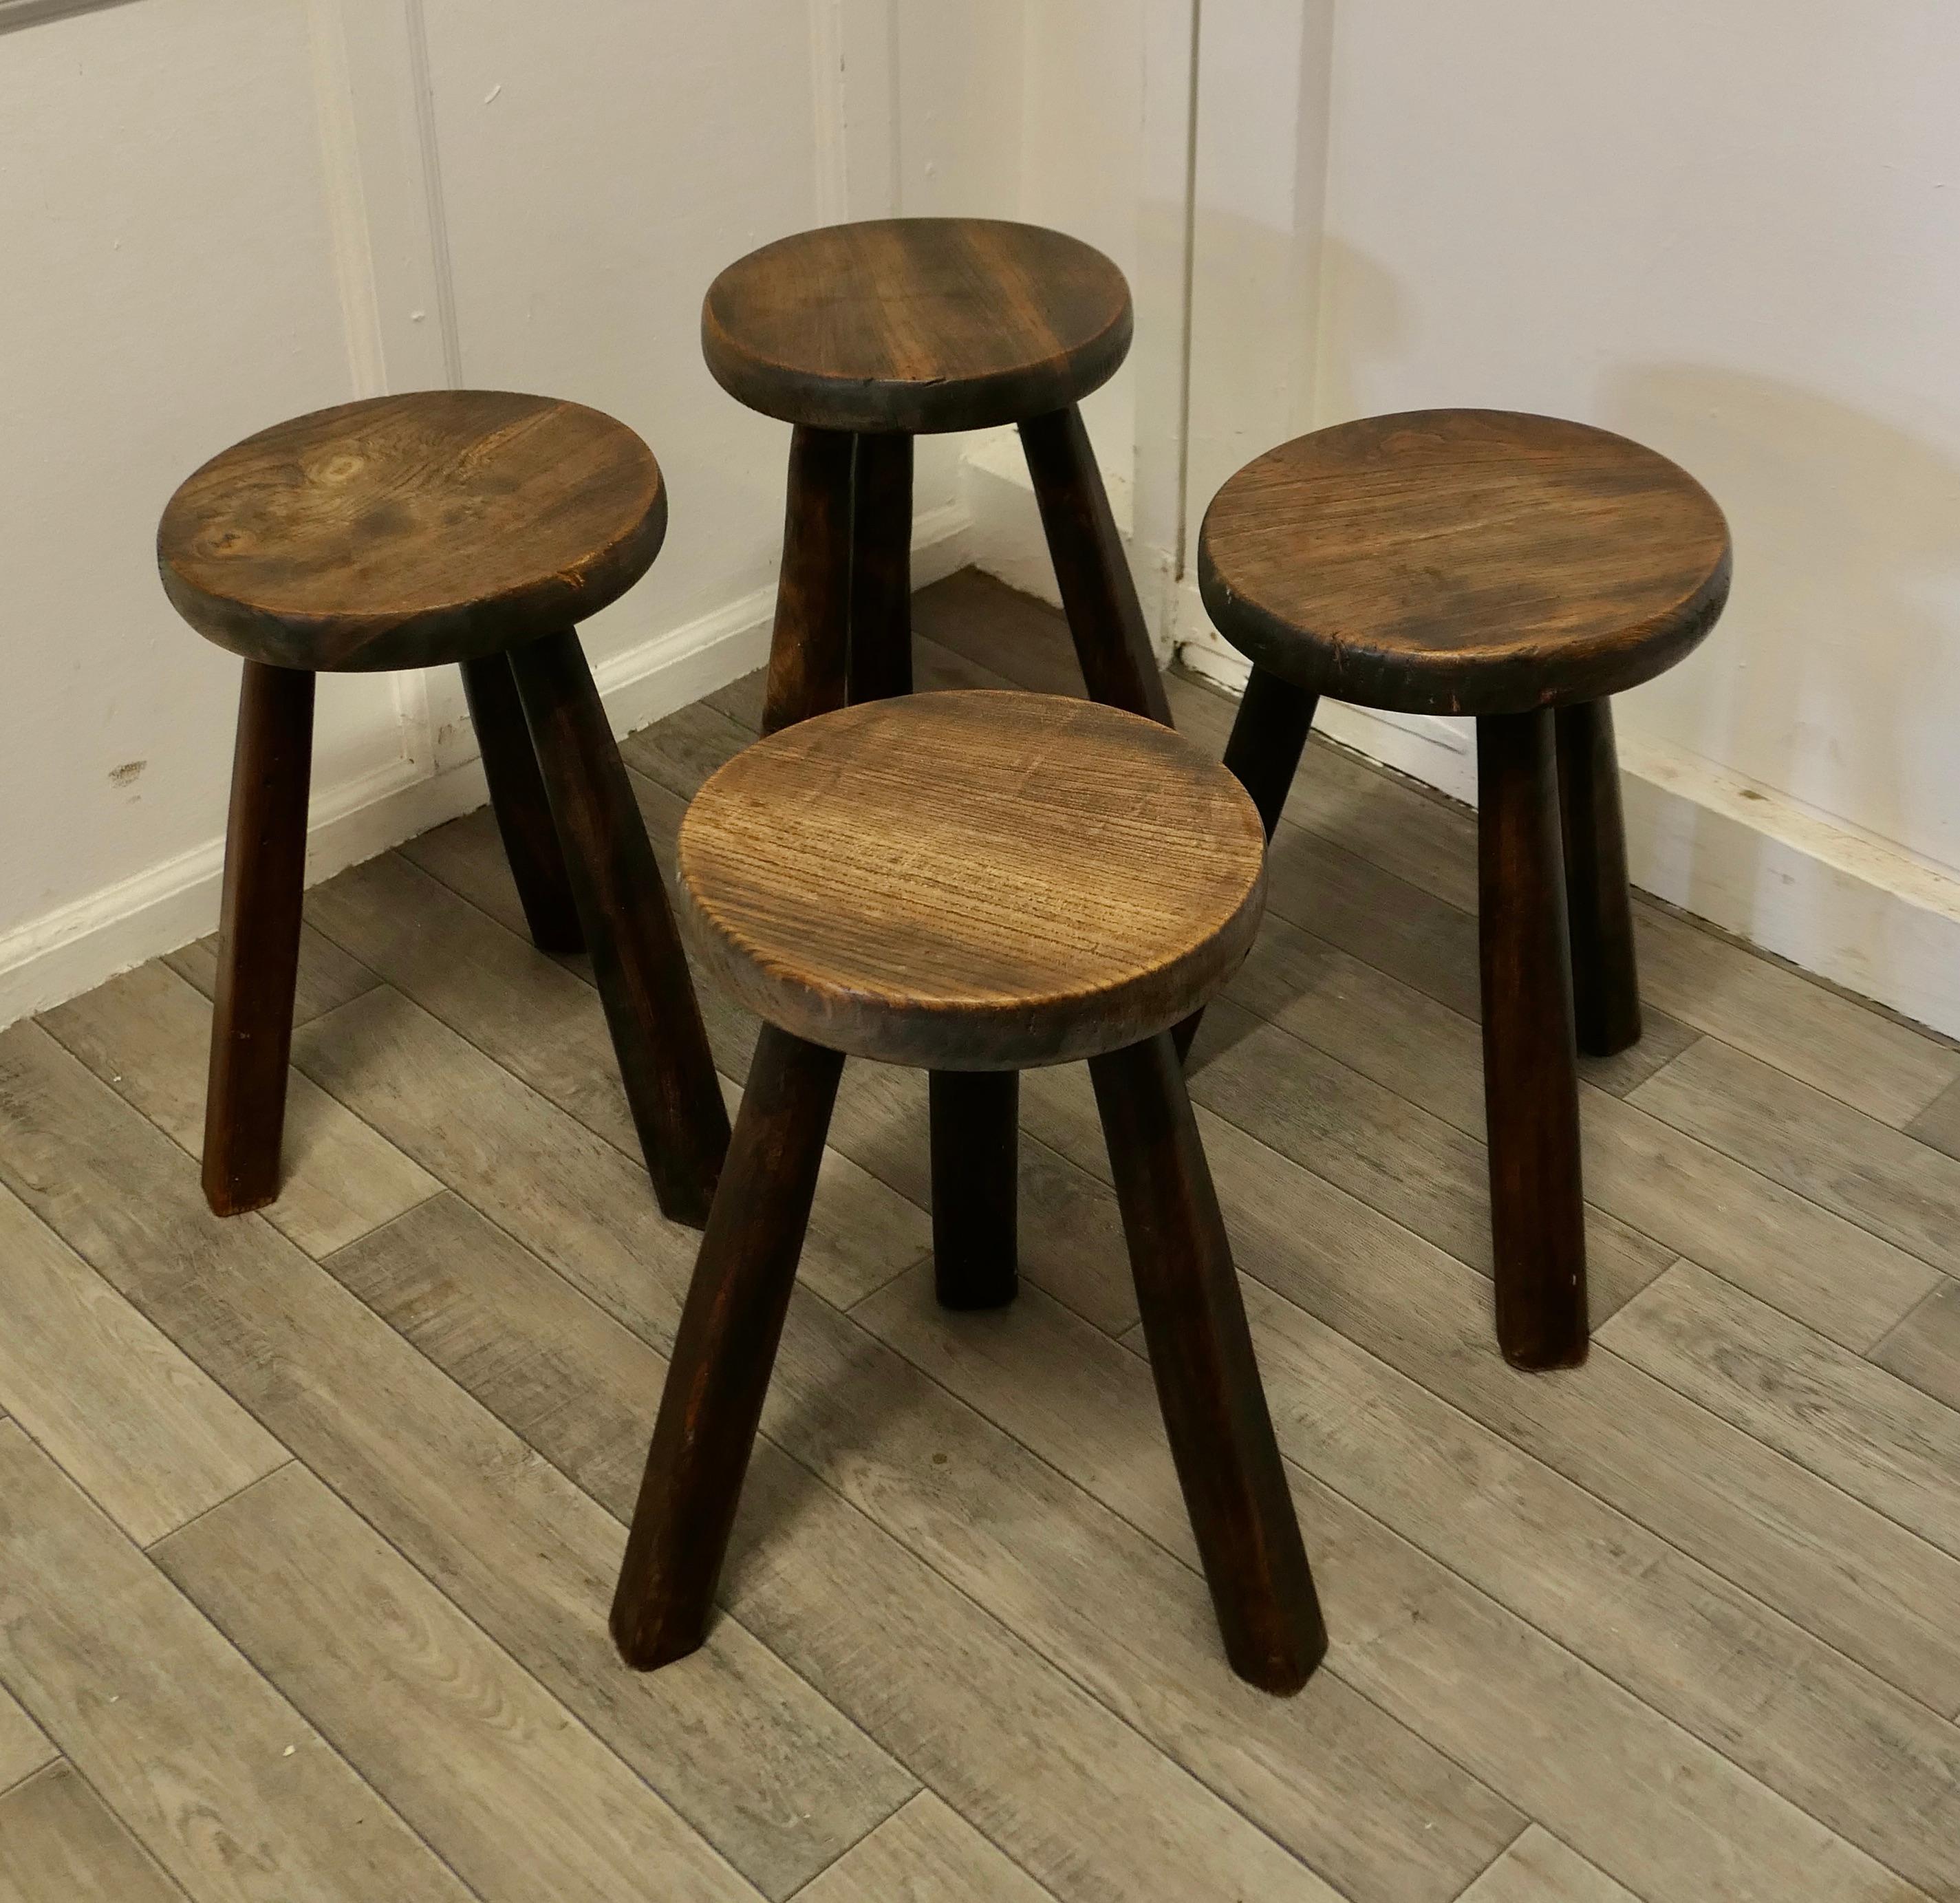 Set of 4 rustic handmade elm farmhouse kitchen stools

Beautiful handmade country pieces with a good patina, they have 2” thick Round elm seats with strong chunky legs 
The stools are sturdy and sound, the seats are 18” high and 12” in